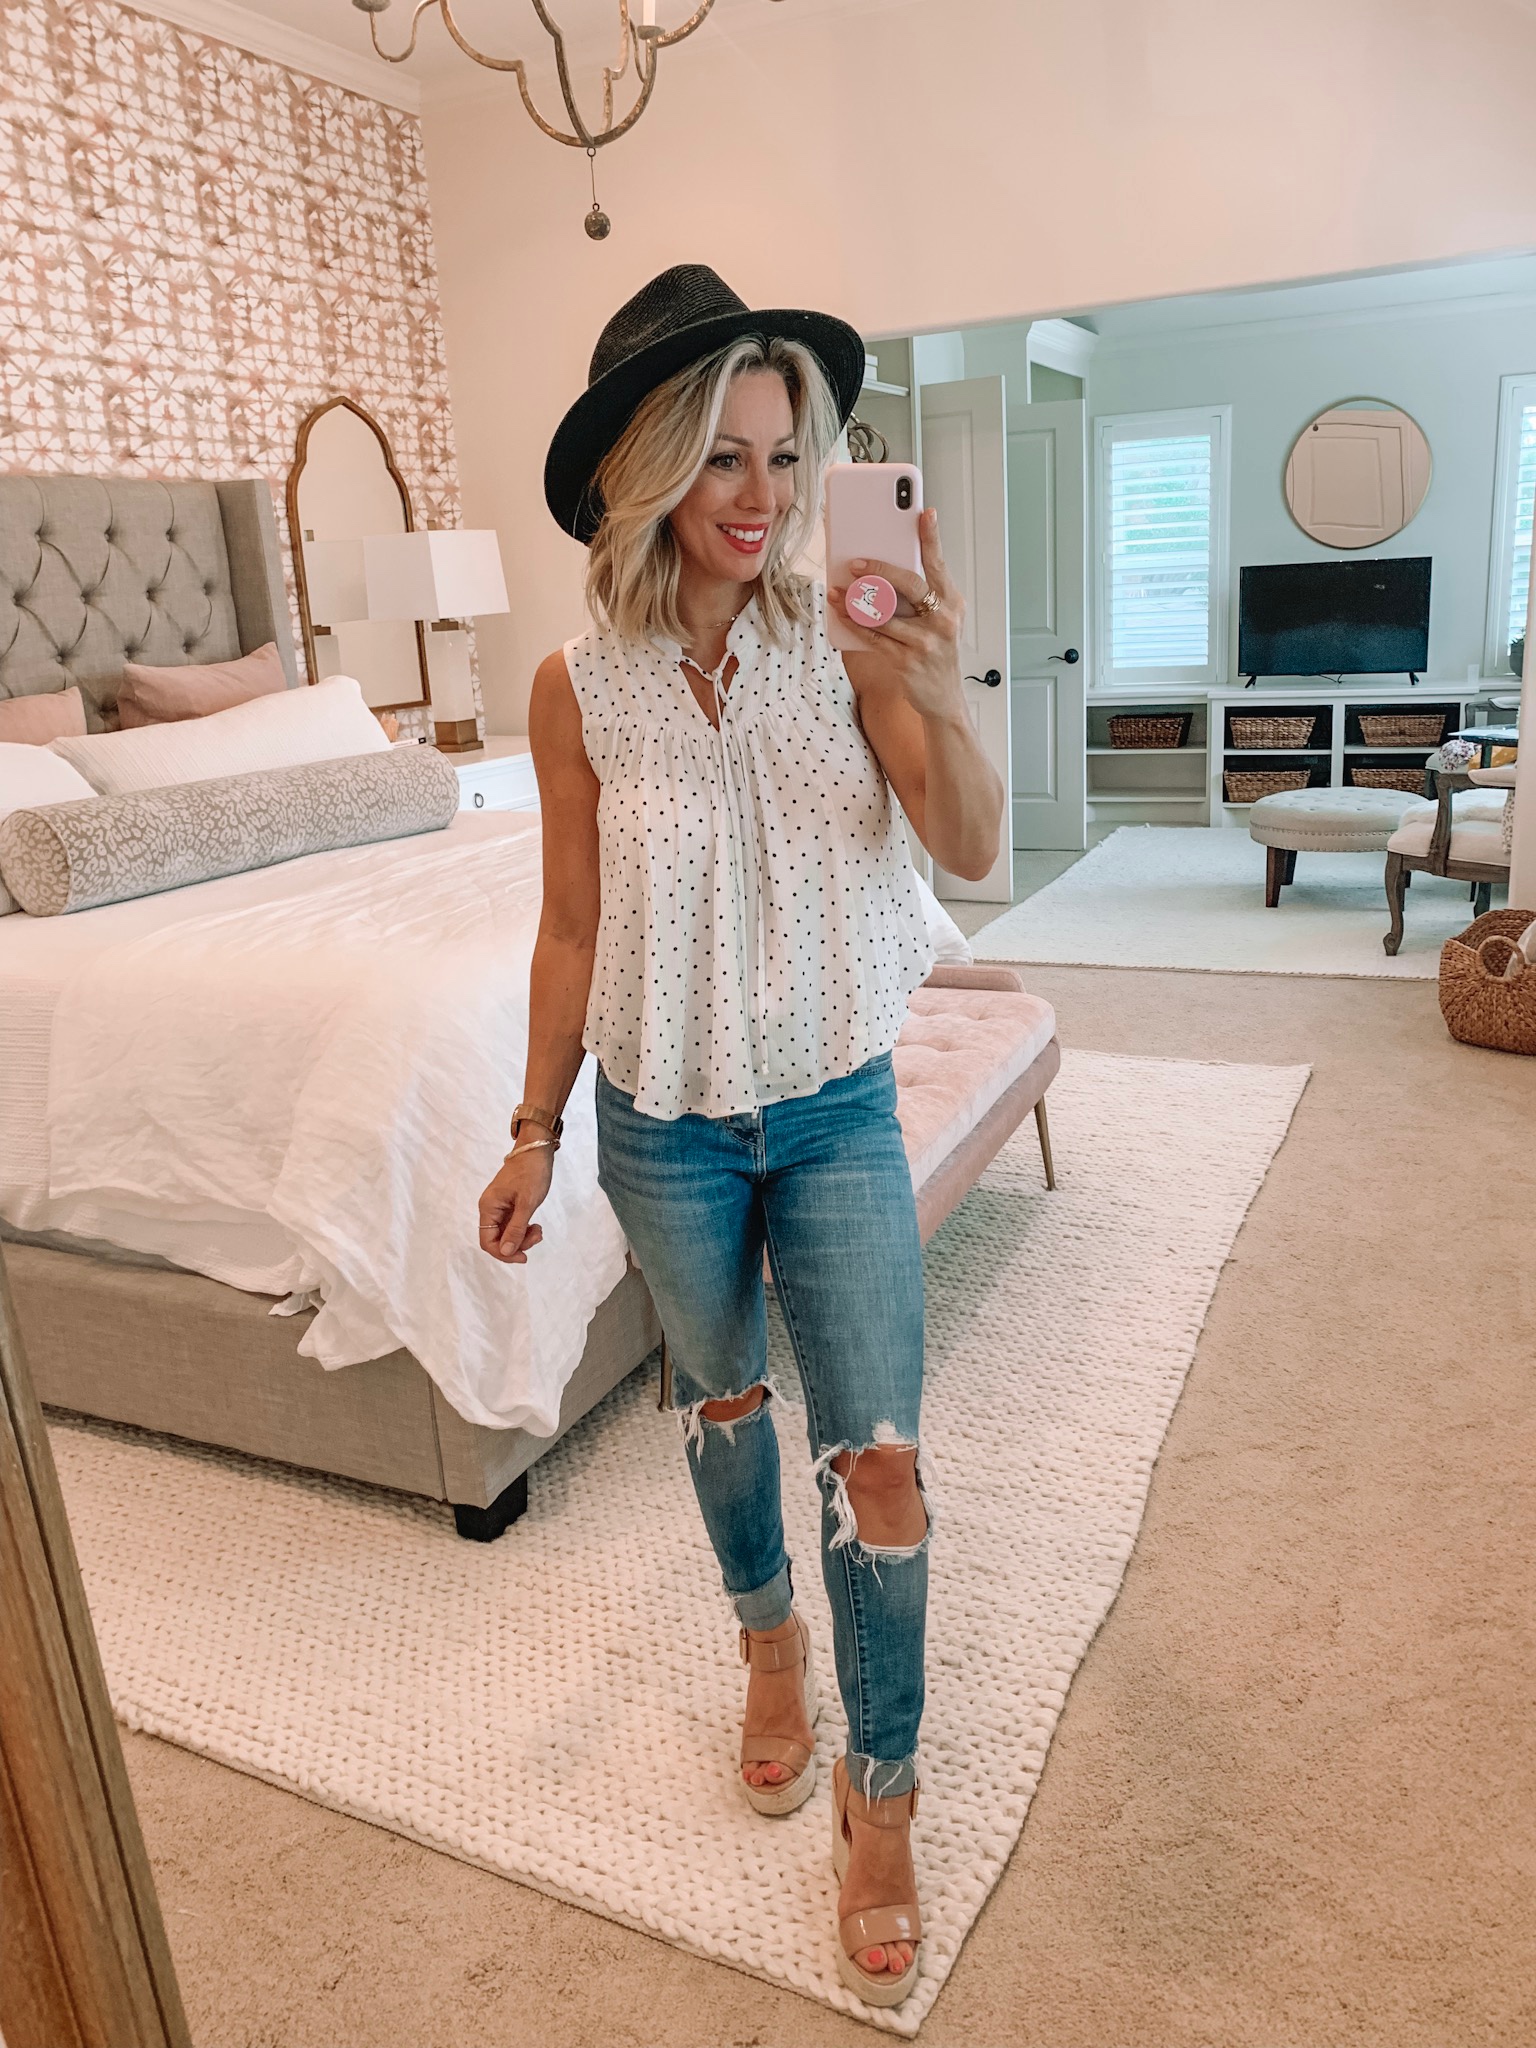 Polka dot top and ripped jeans with wedges